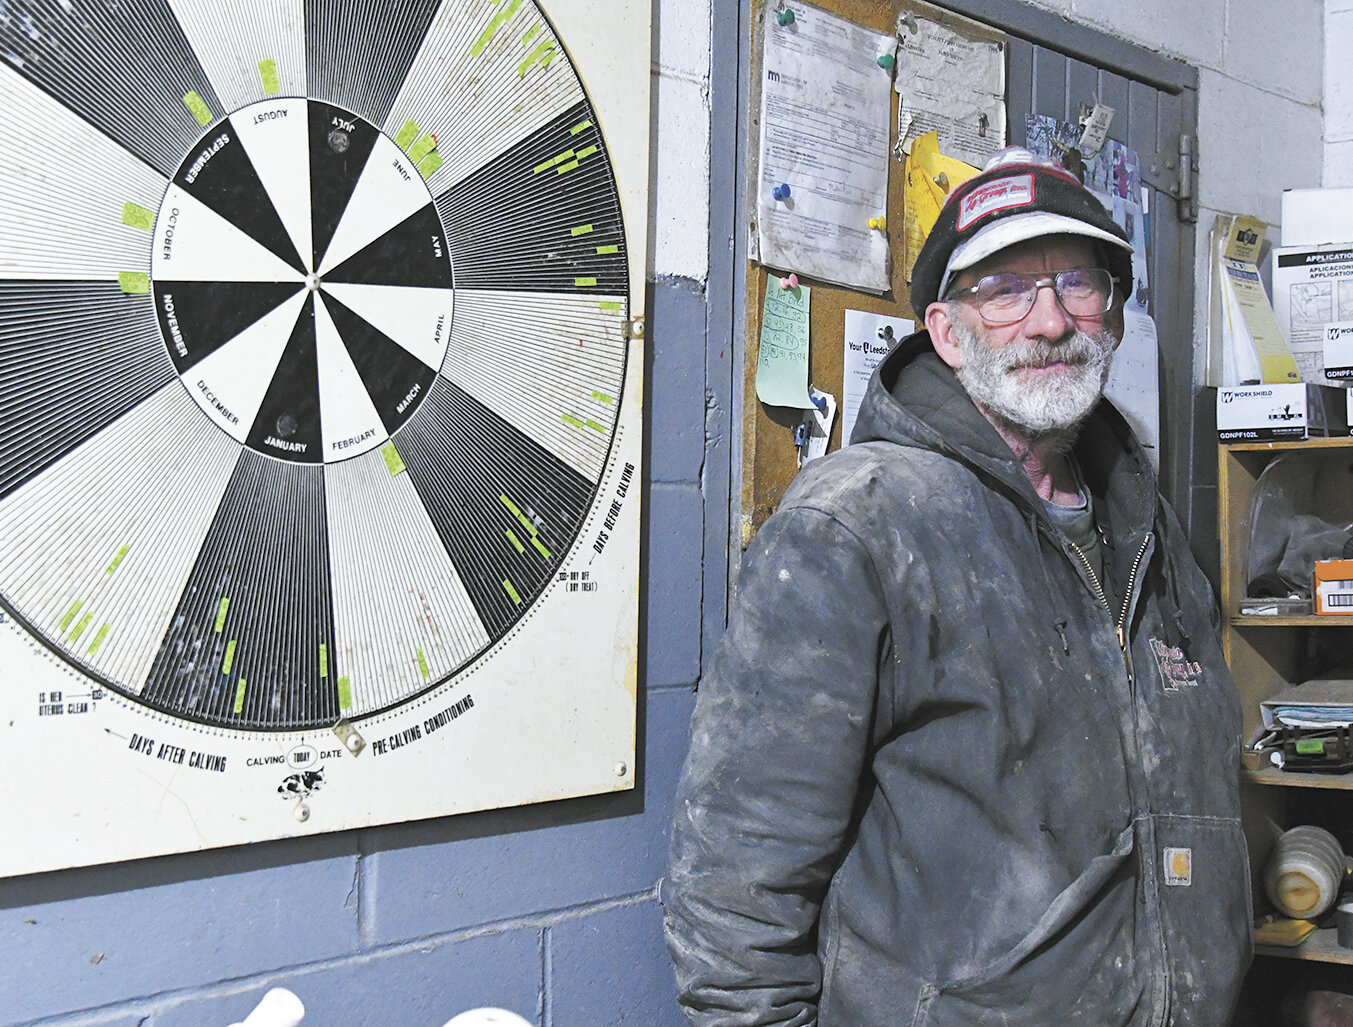 Patrick O’Brien smiles by his herd wheel Jan. 26 on his dairy farm near Kasson, Minnesota. O’Brien uses the herd wheel on his milkhouse wall to record calving and breeding information.